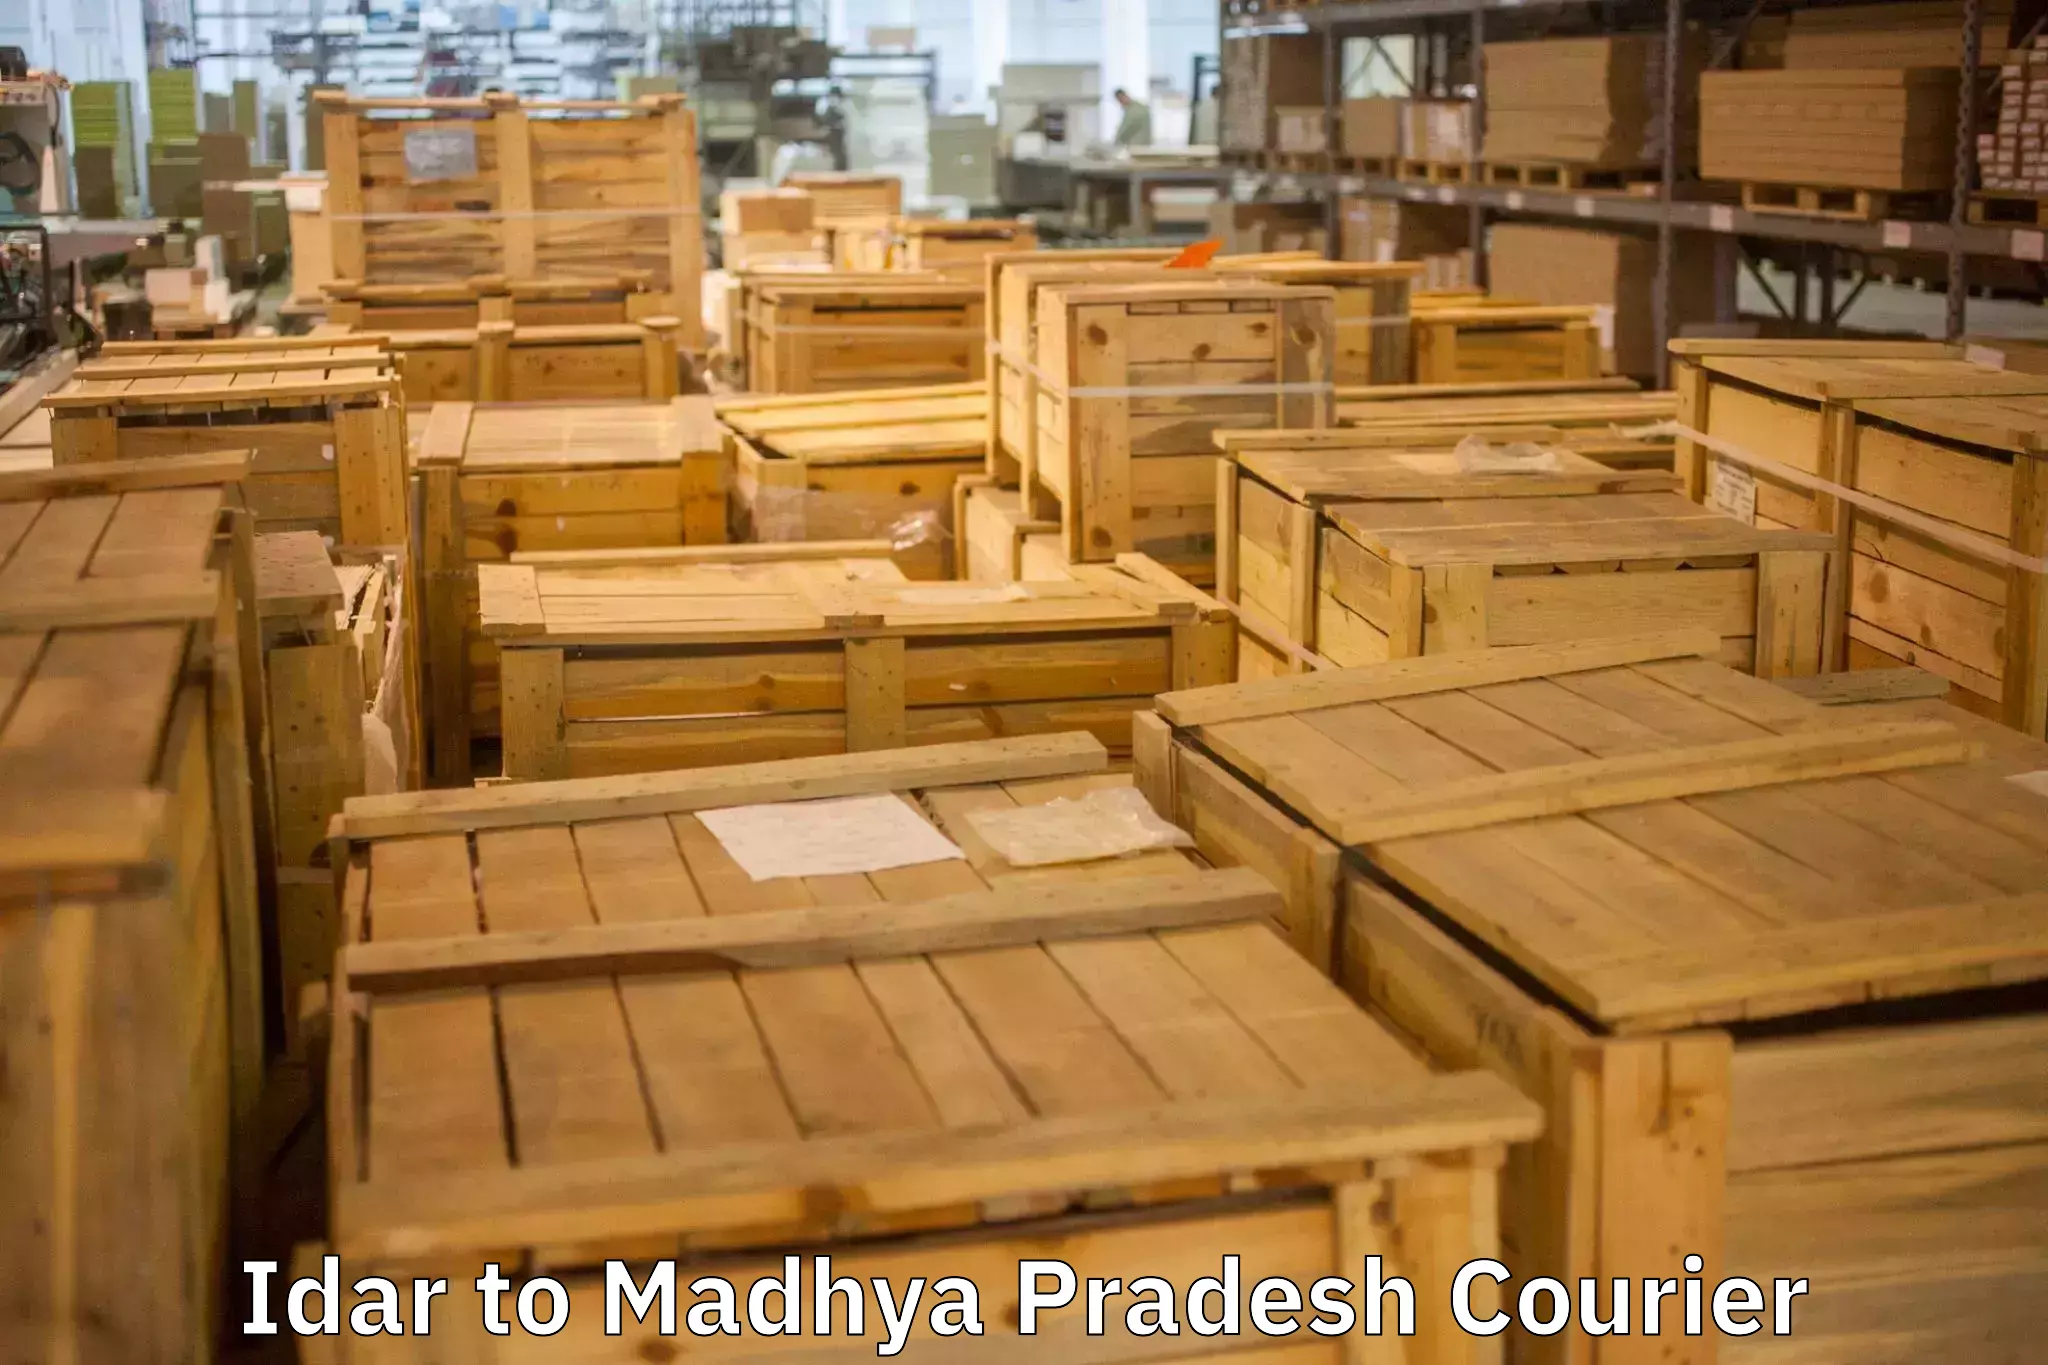 Customized relocation services in Idar to Madhya Pradesh